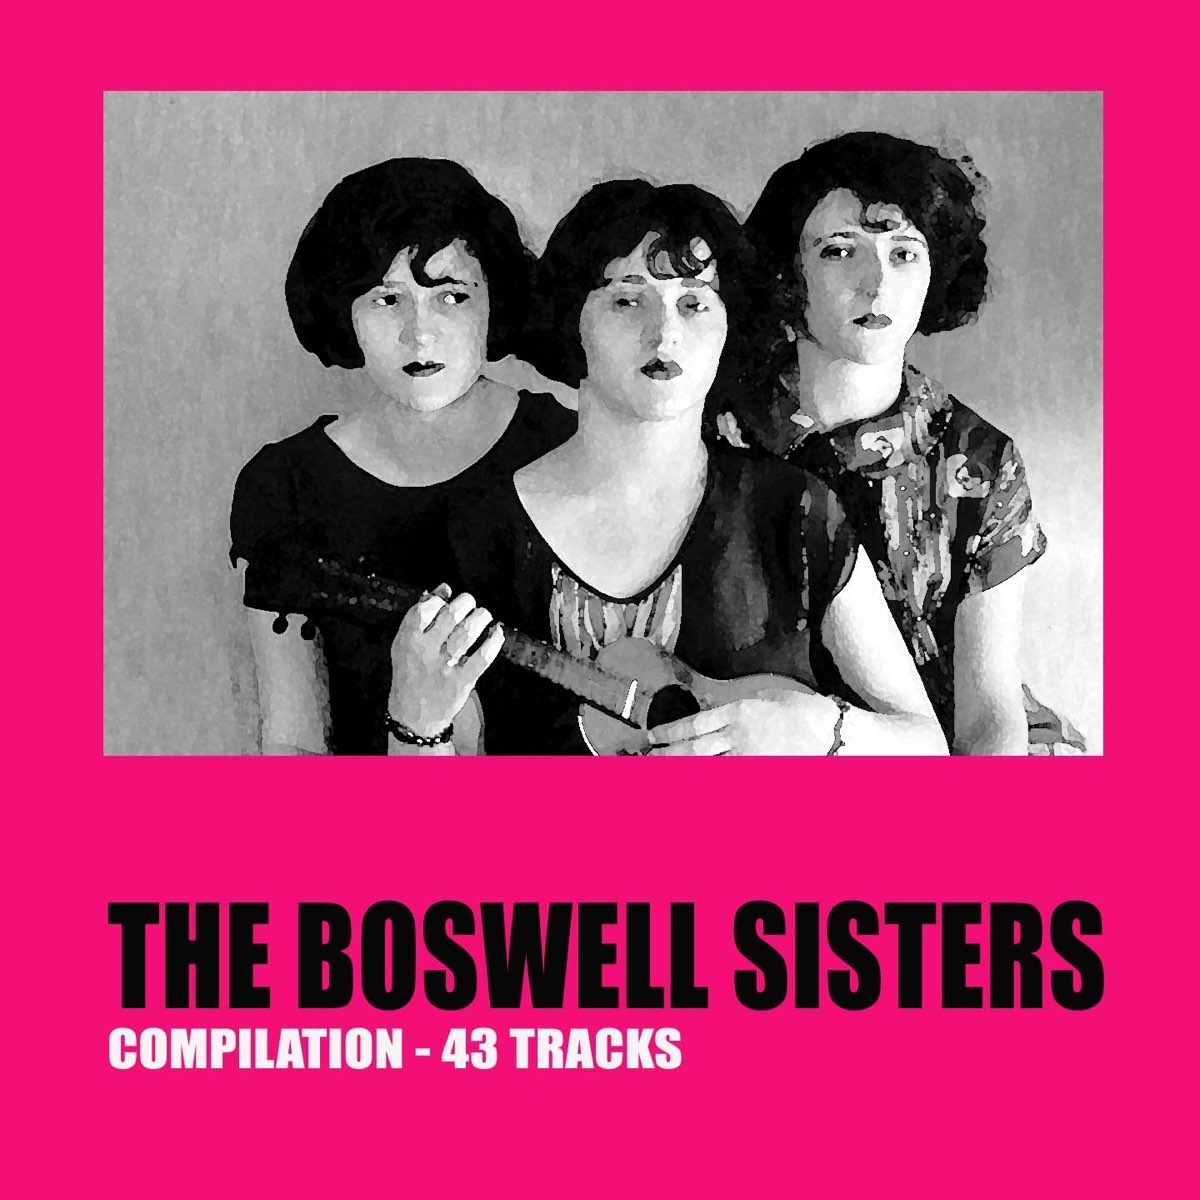 ‎The Boswell Sisters Compilation (43 Tracks) by The Boswell Sisters on ...